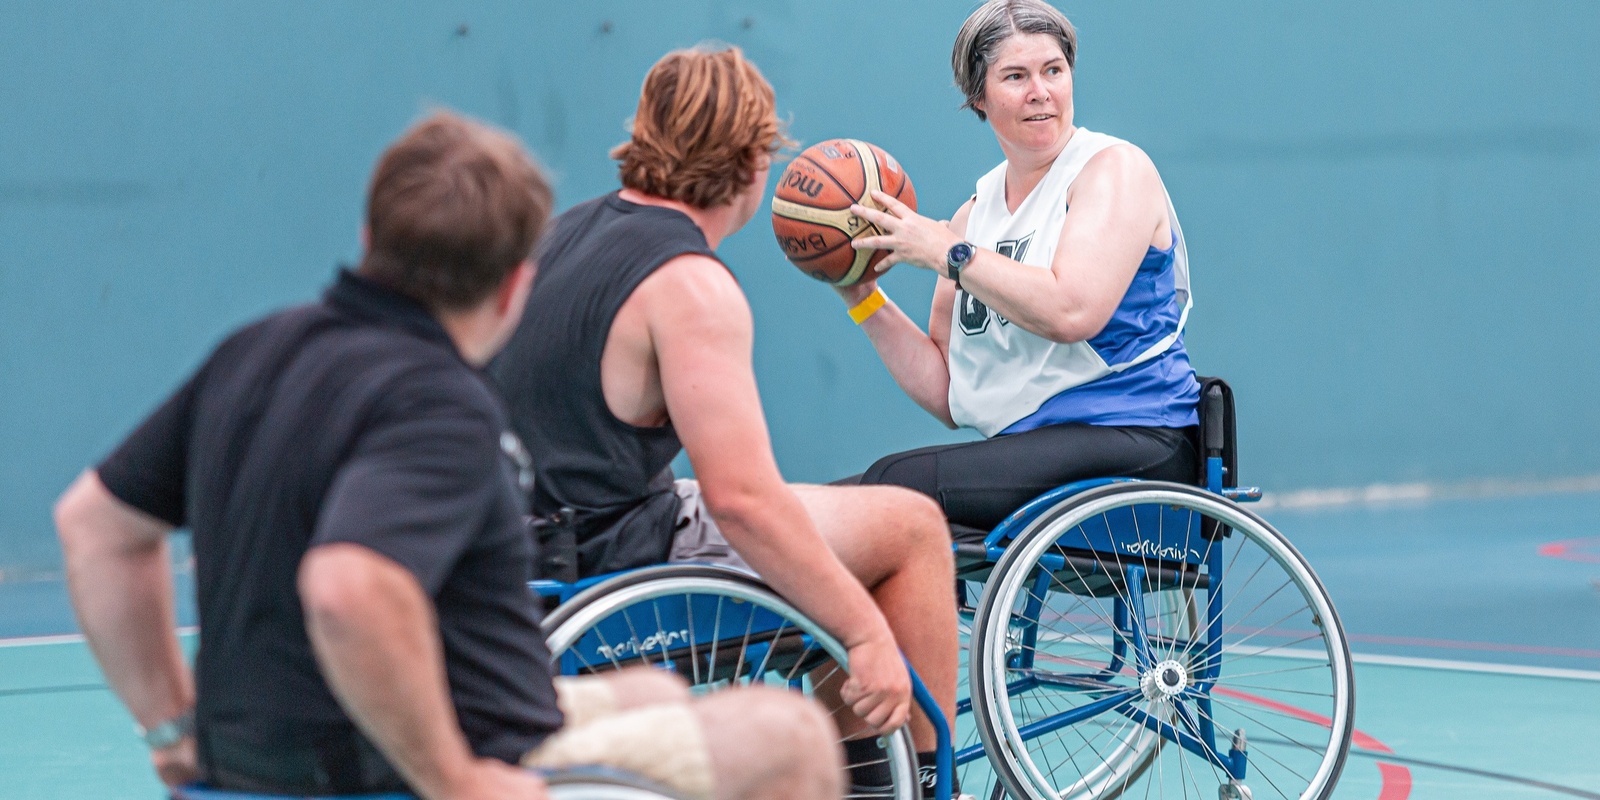 Sports for All - Wheelchair Basketball Come and Try